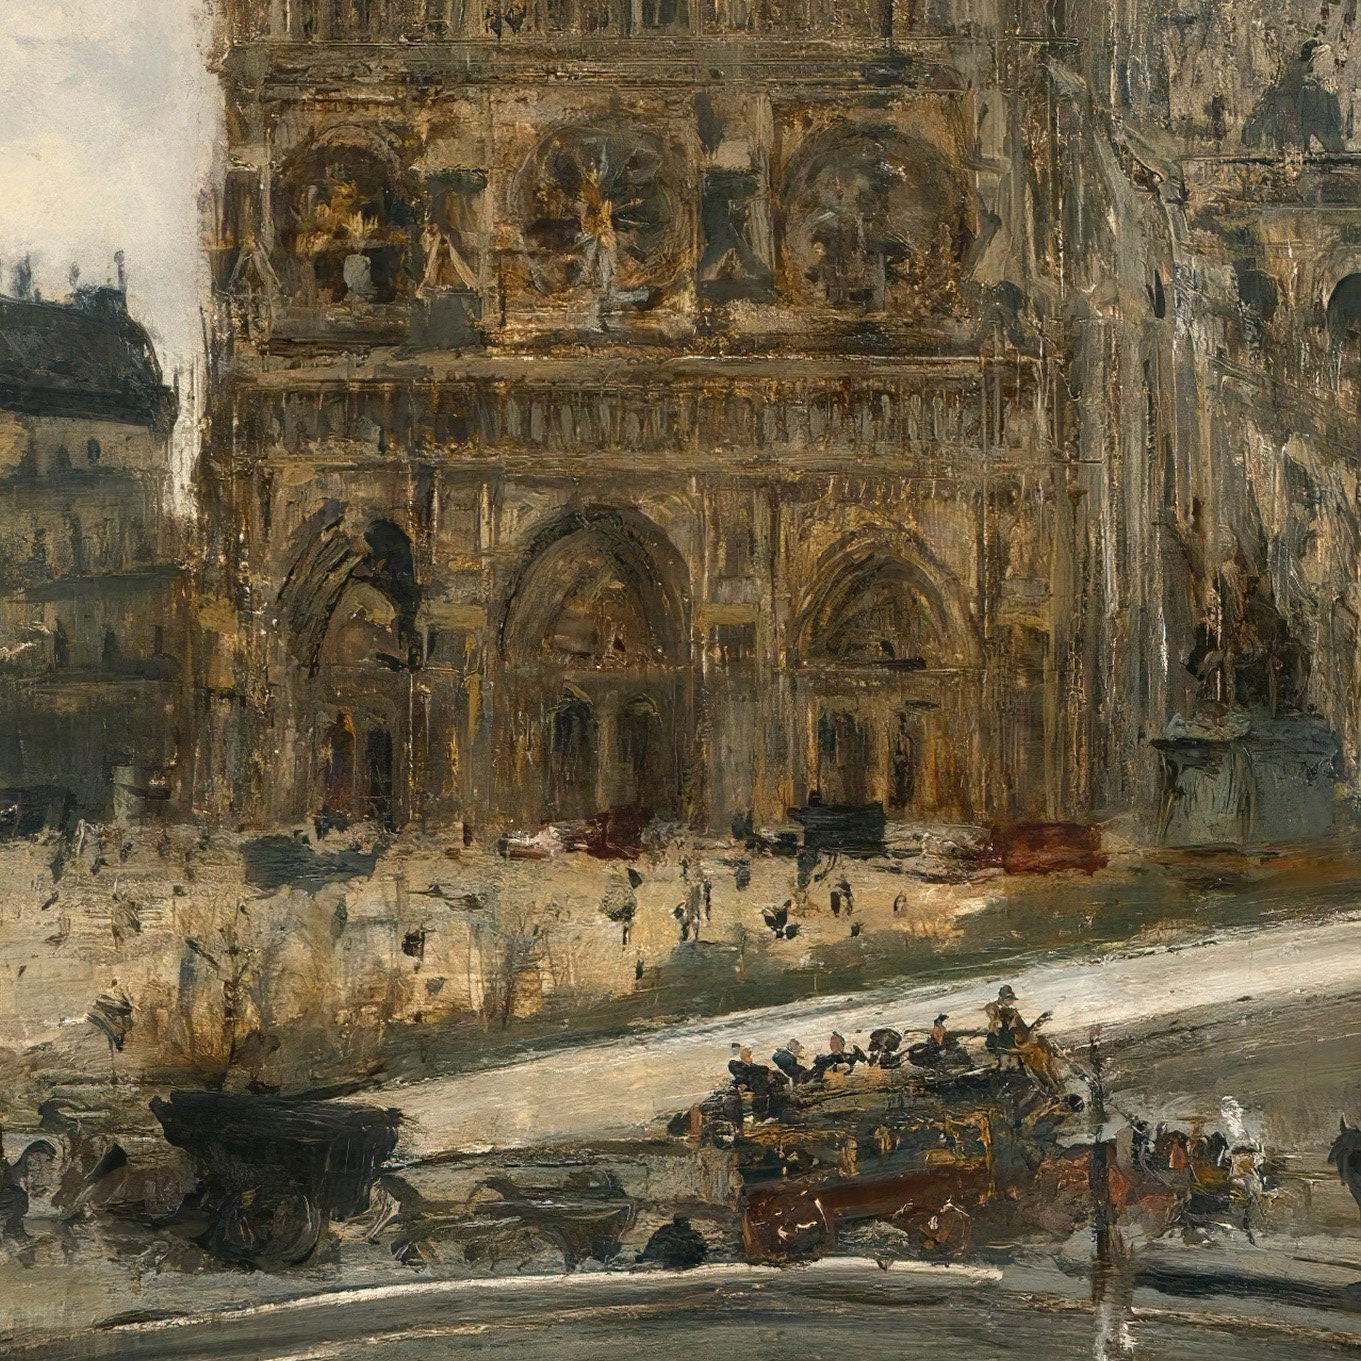 View Of Paris With Notre Dame - Edouard Jacques Dufeu, 3d Printed with texture and brush strokes looks like original oil-painting, code:557